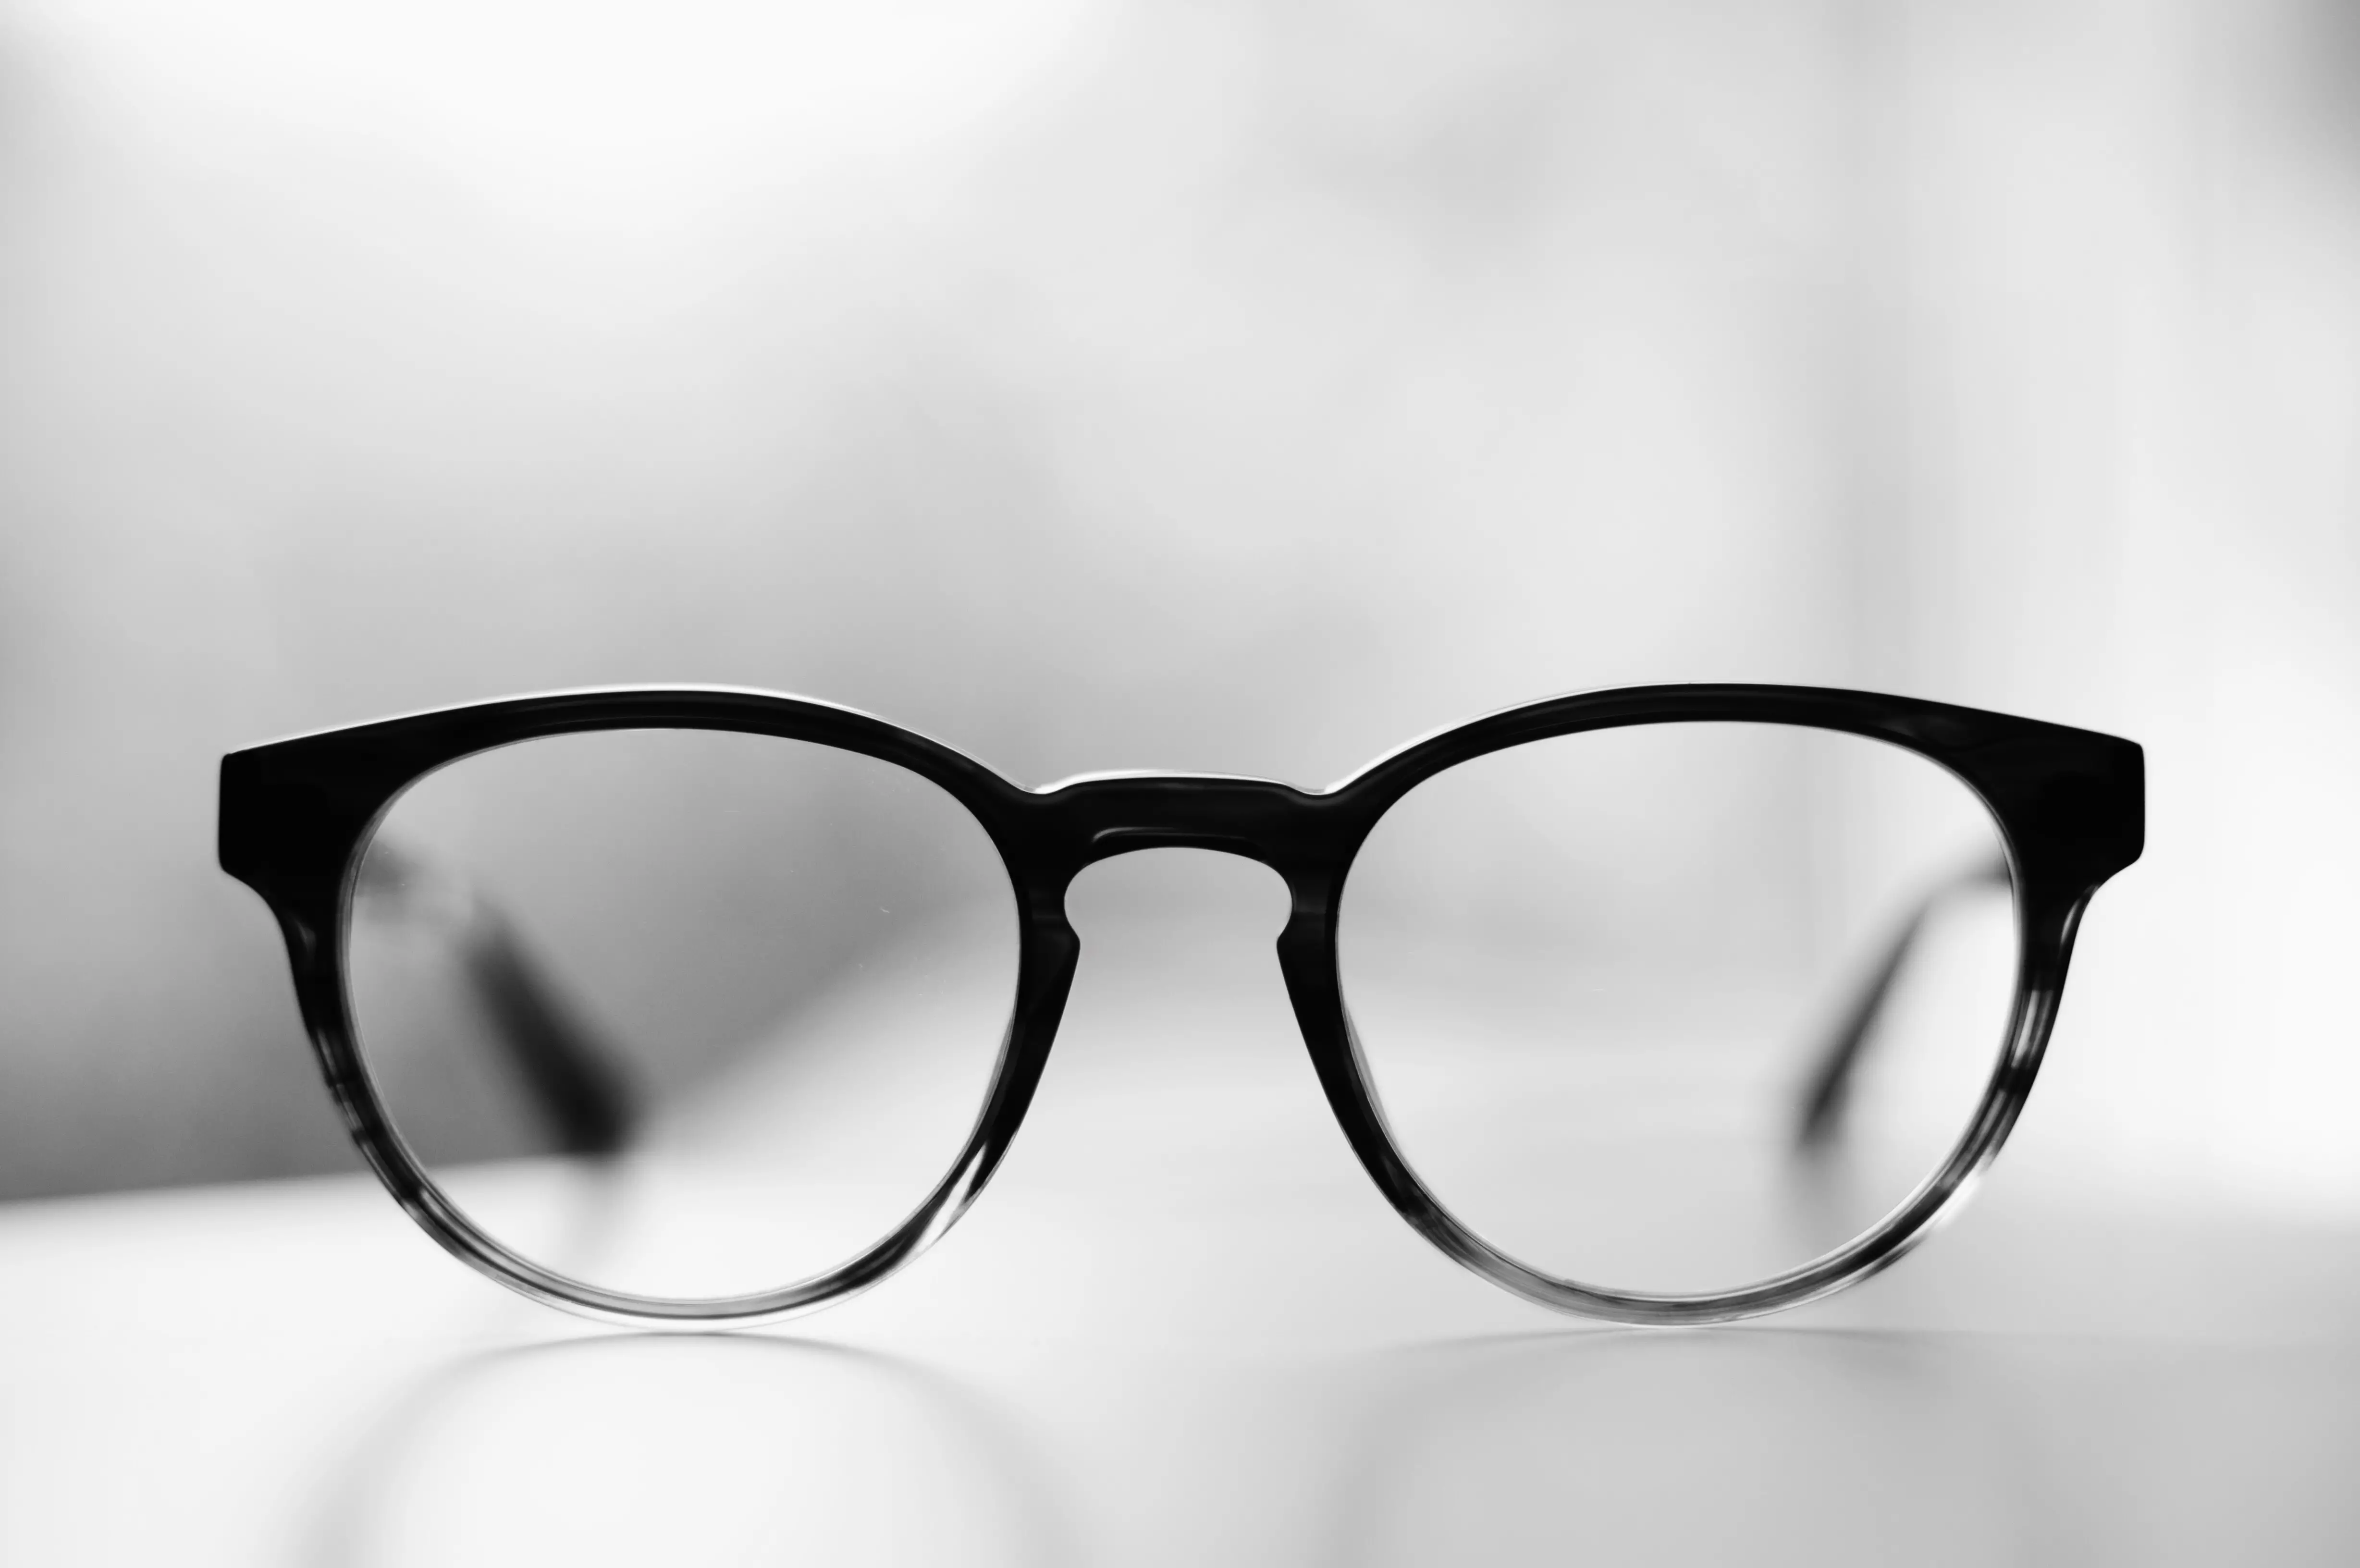 Can You Get Progressive Lenses At Warby Parker?